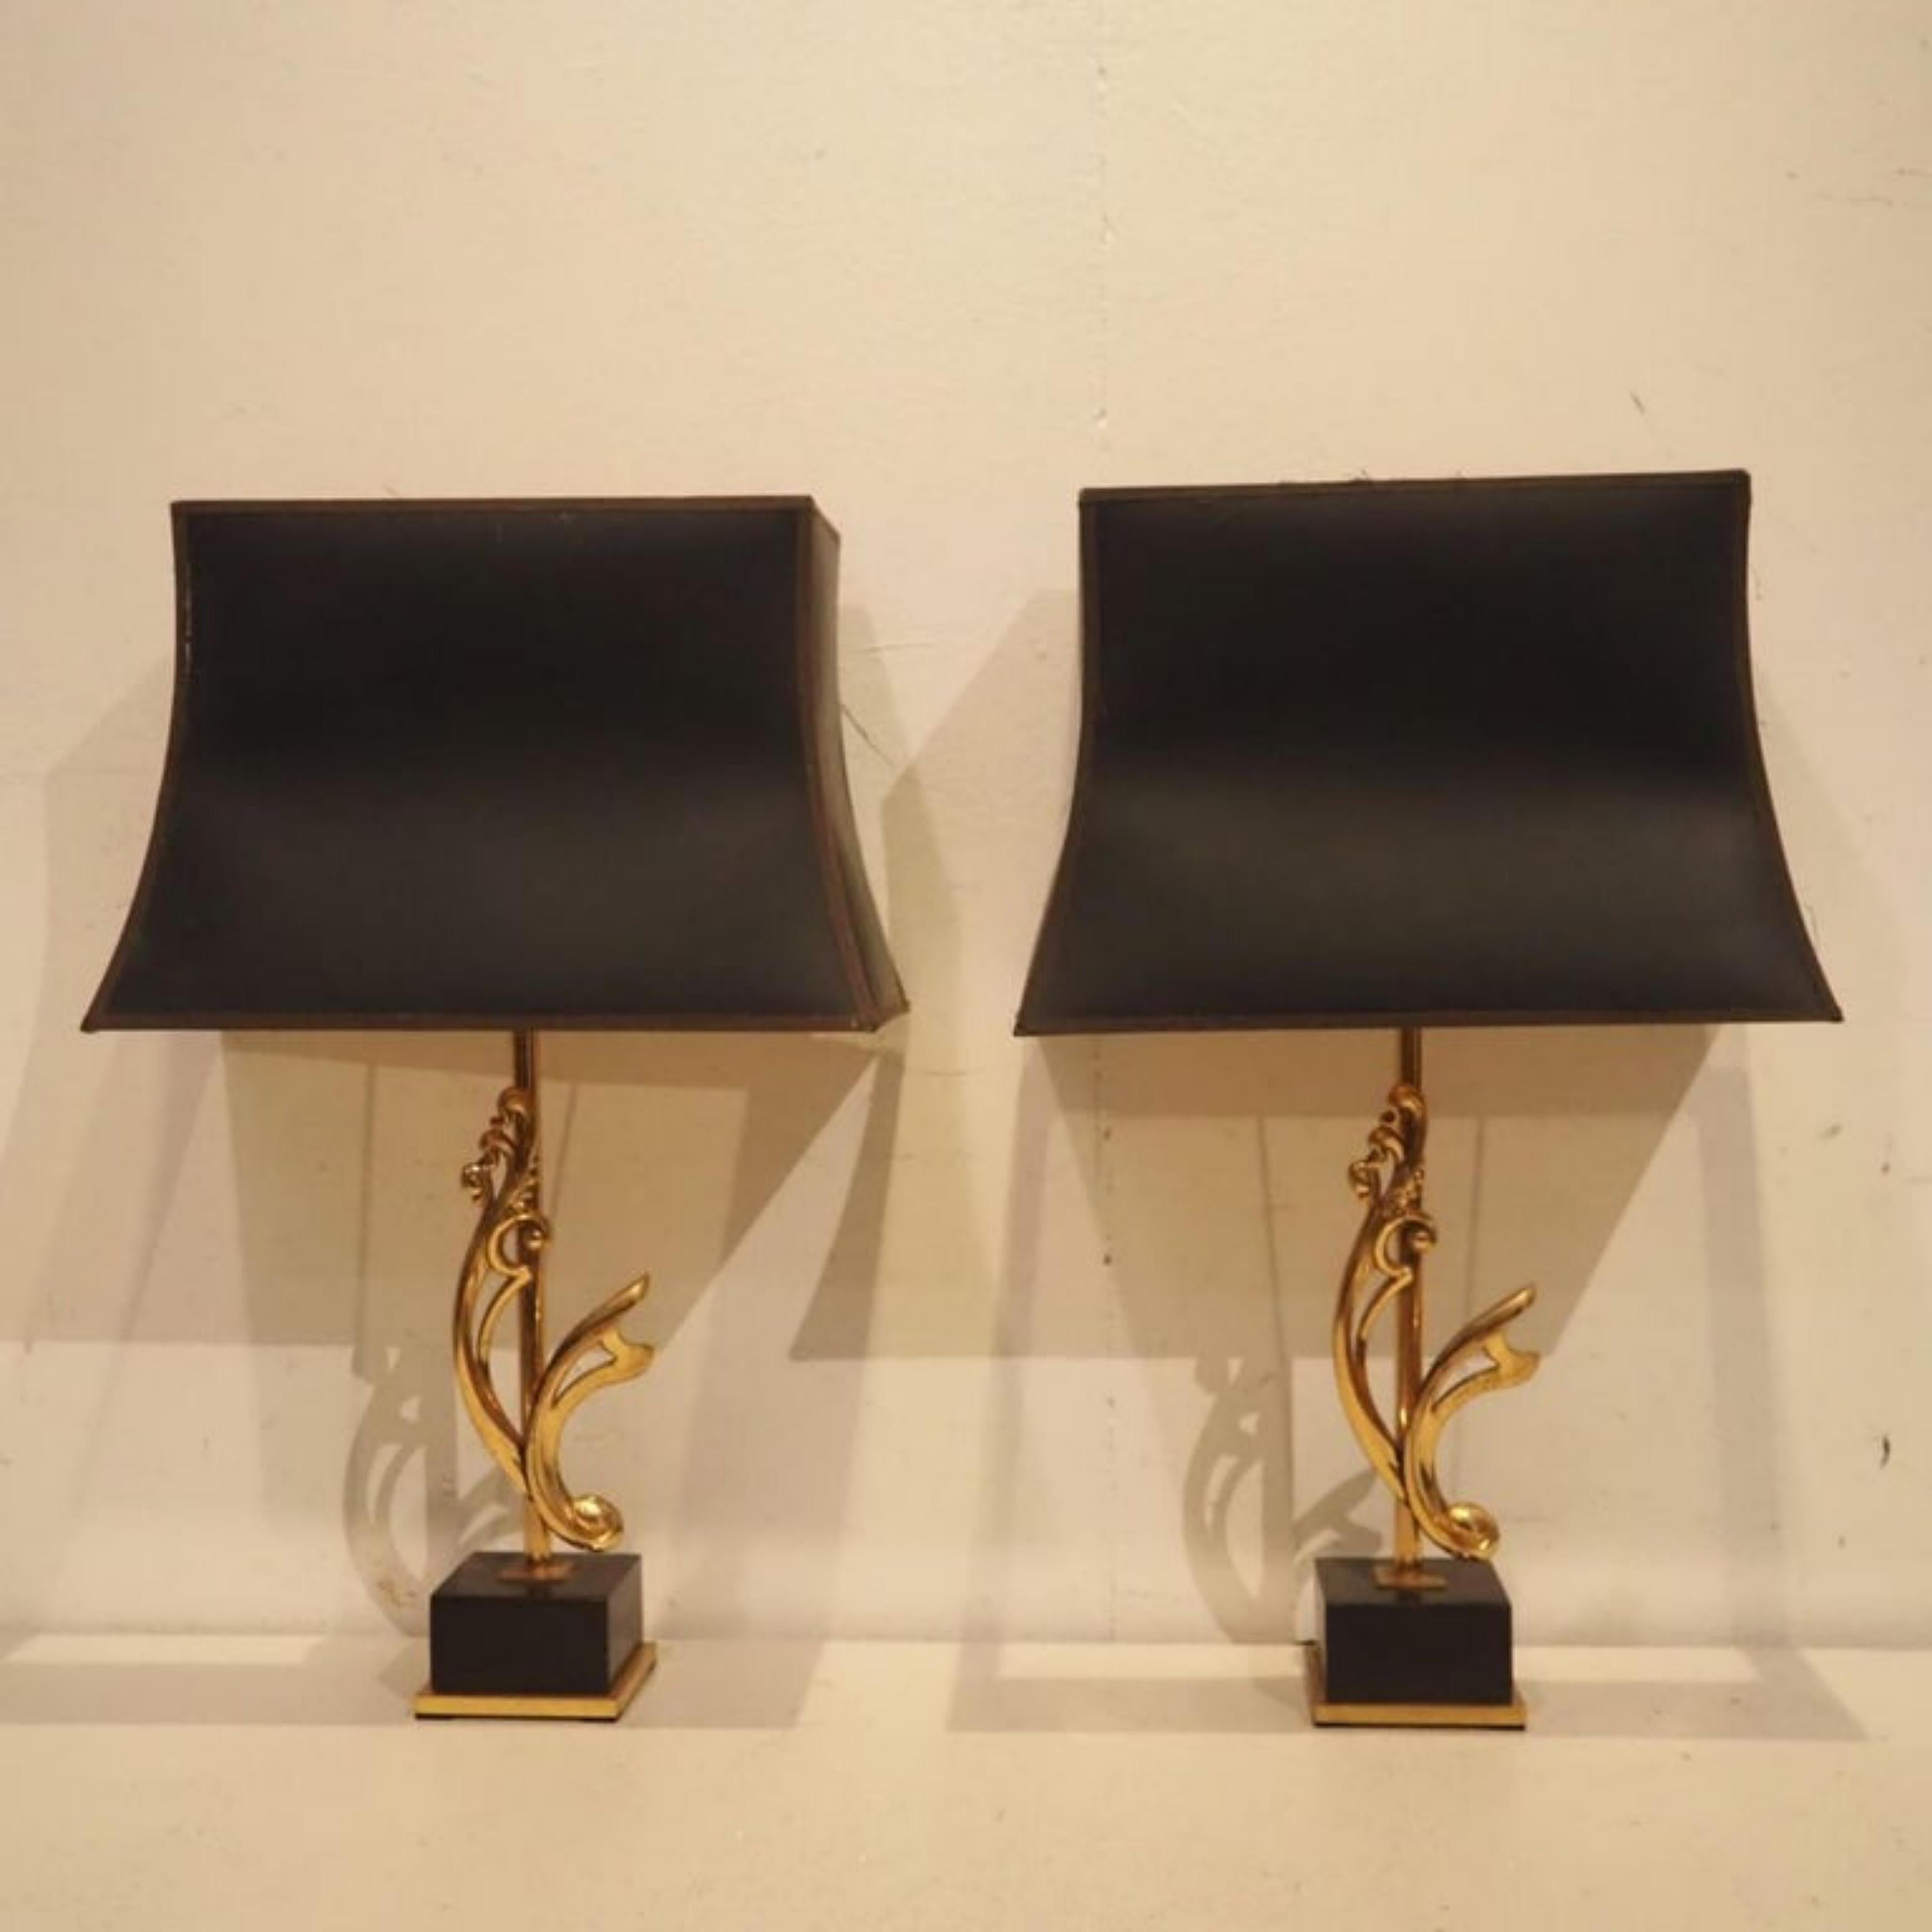 Maison Charles Paris
Pair of leaf lamps circa 1970, gilded bronze on black marble base, pagoda-shaped lampshade, Total height : 52, W : 33, D : 18 cm
Very good condition.

